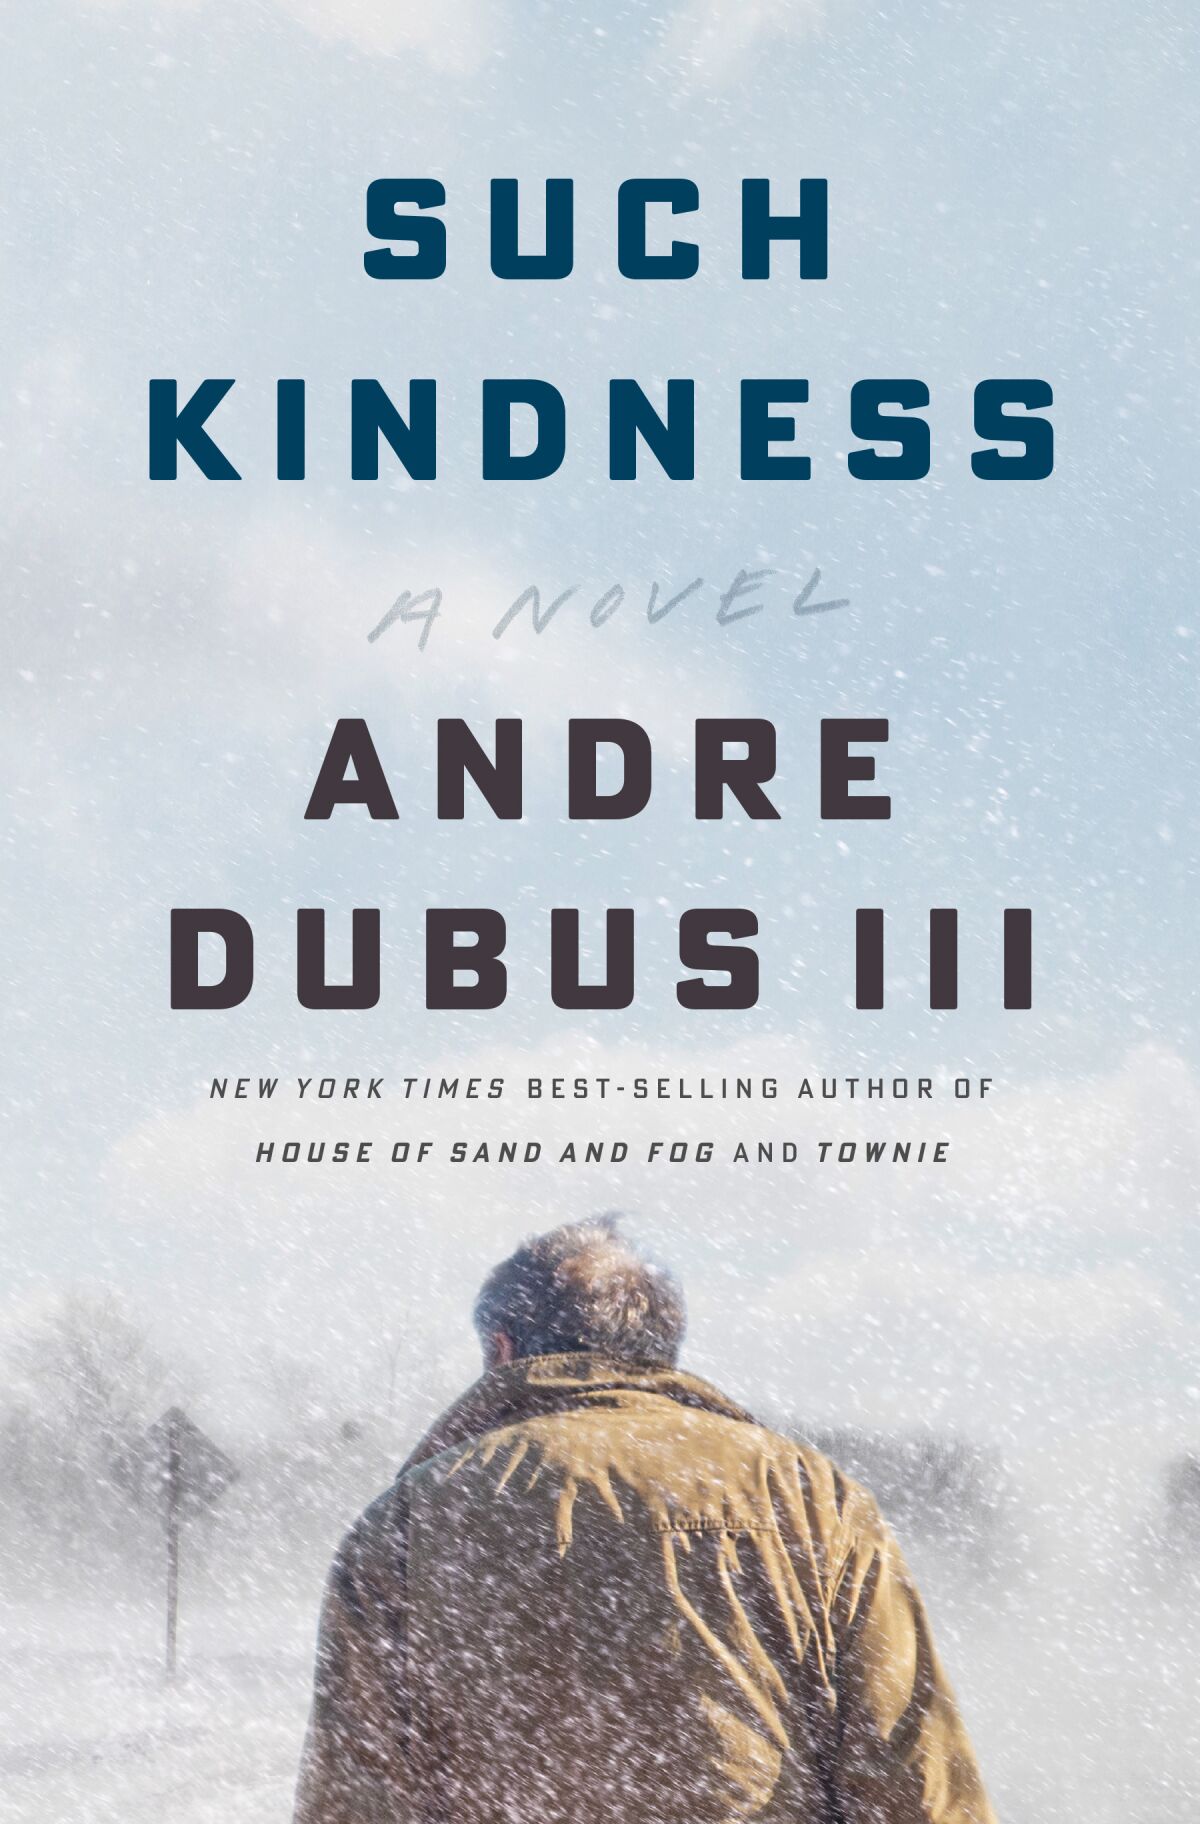 The book cover for 'Such Kindness,' by Andre Dubus III, shows a man from the back, in a parka, looking at a bleak landscape